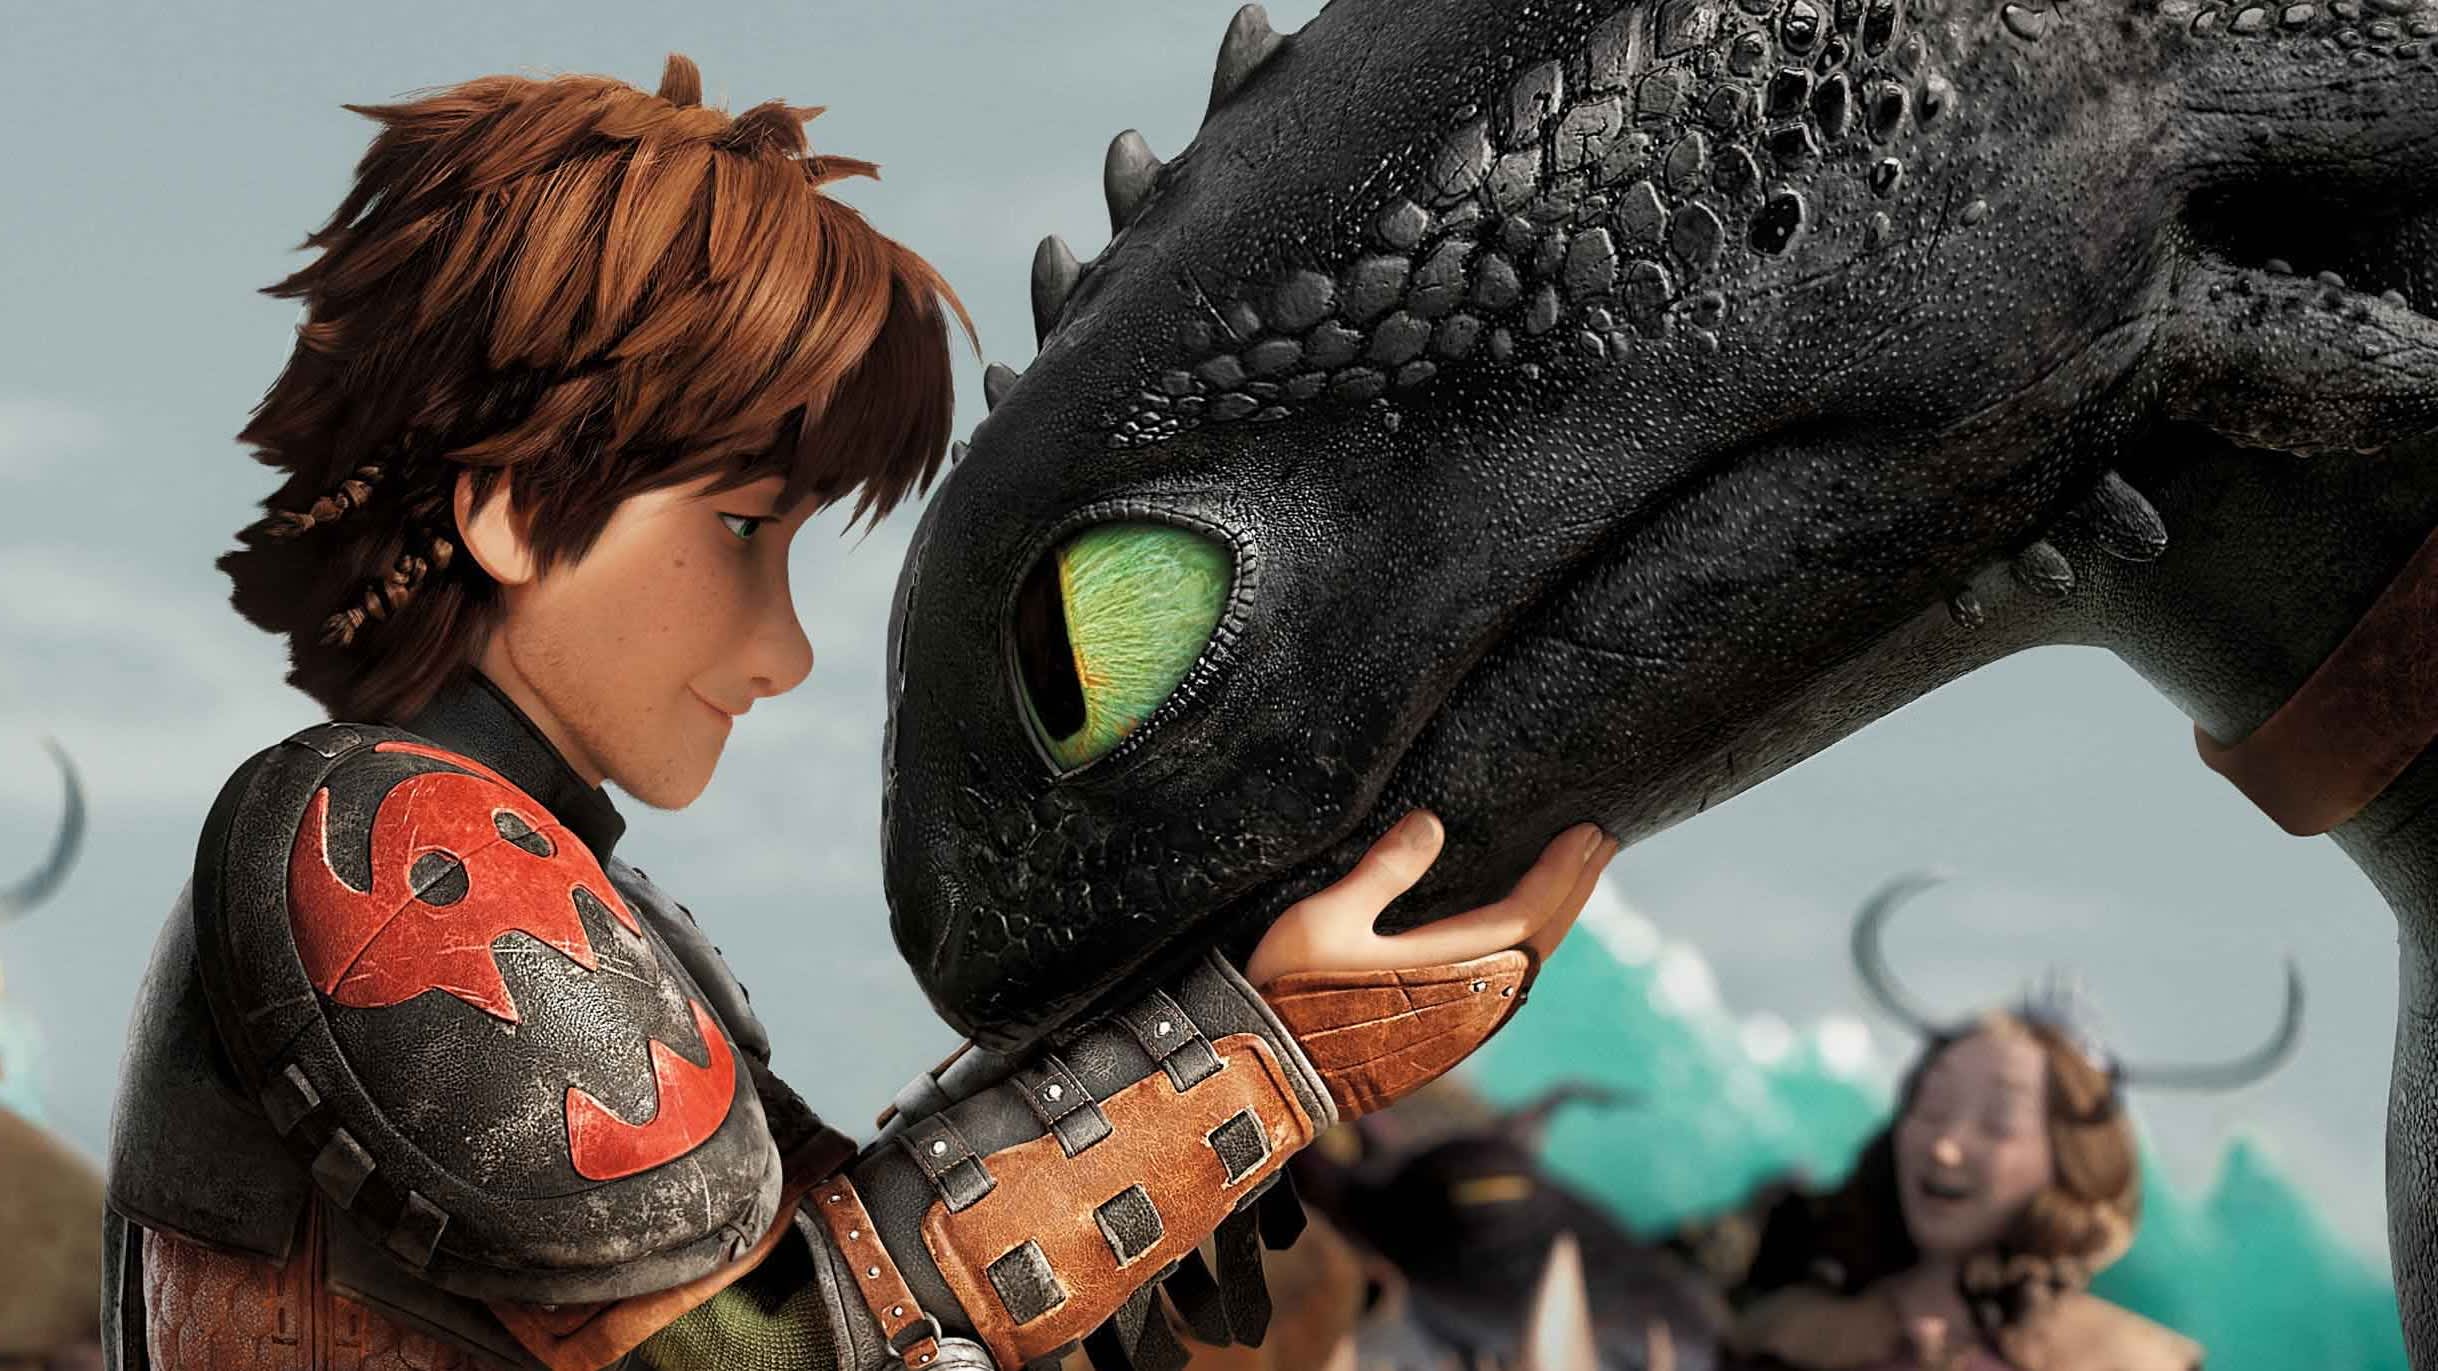 arsenio williams recommends how to train your dragon pictures pic